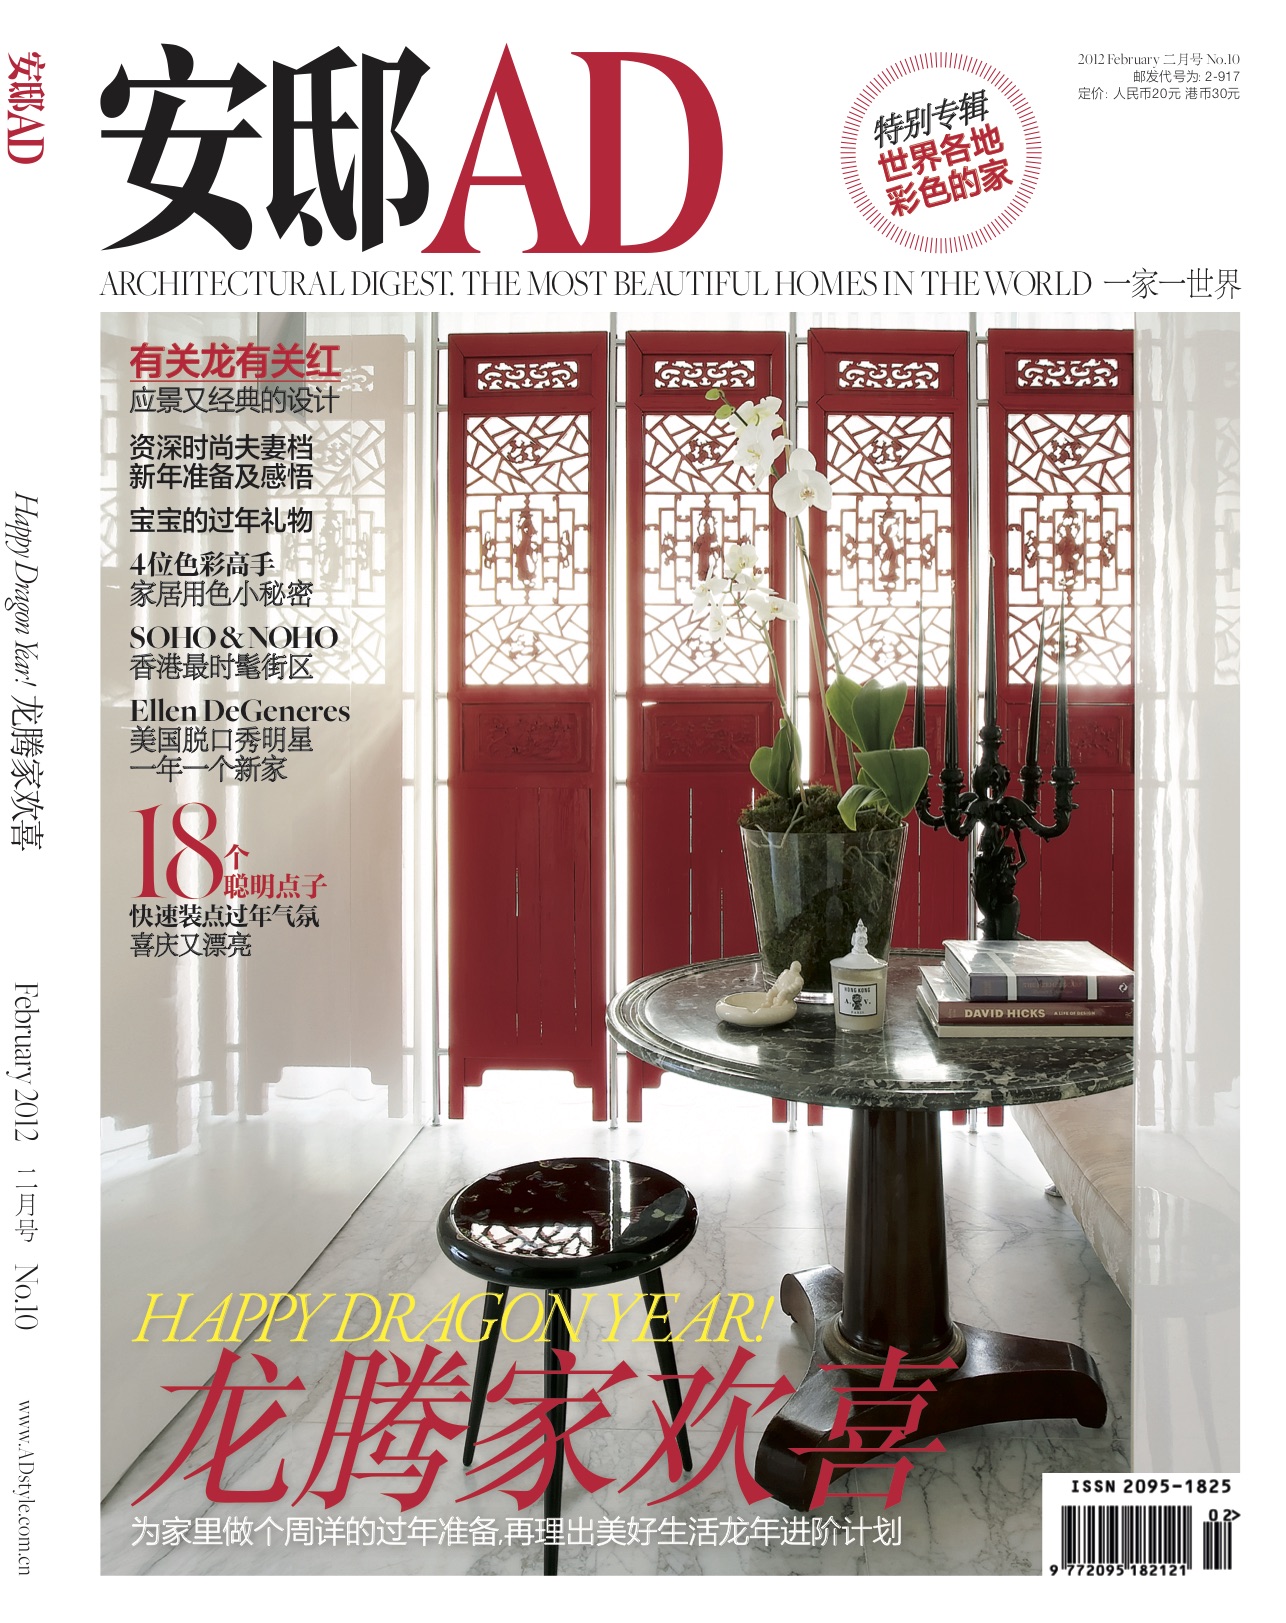 Architectural digest china Feb 2012 cover.jpg